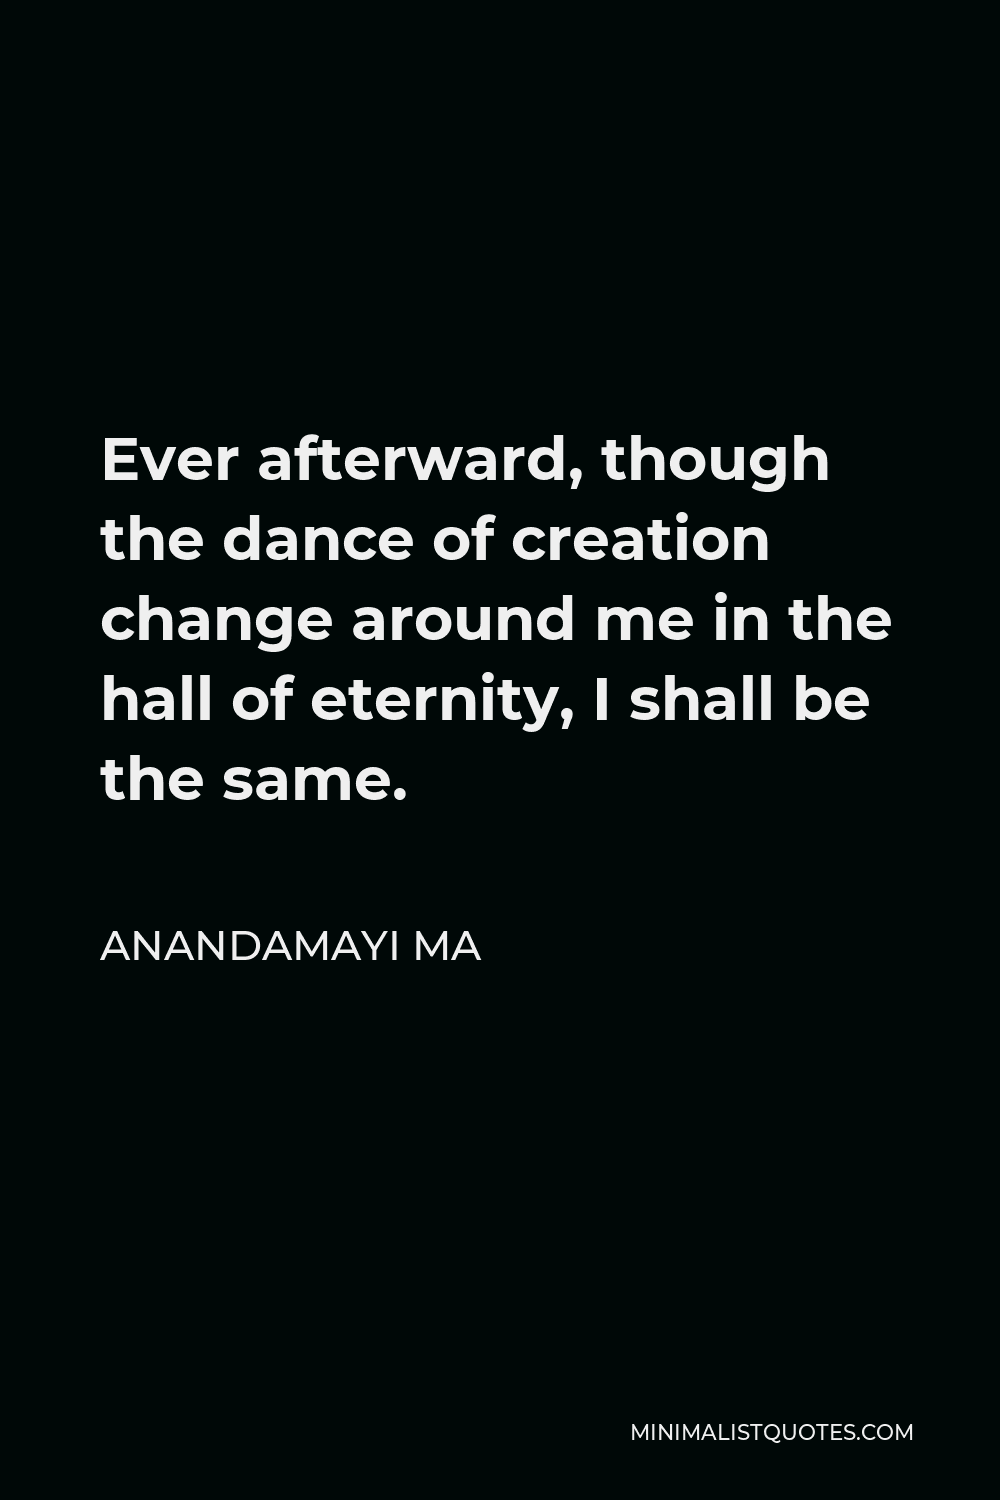 Anandamayi Ma Quote - Ever afterward, though the dance of creation change around me in the hall of eternity, I shall be the same.